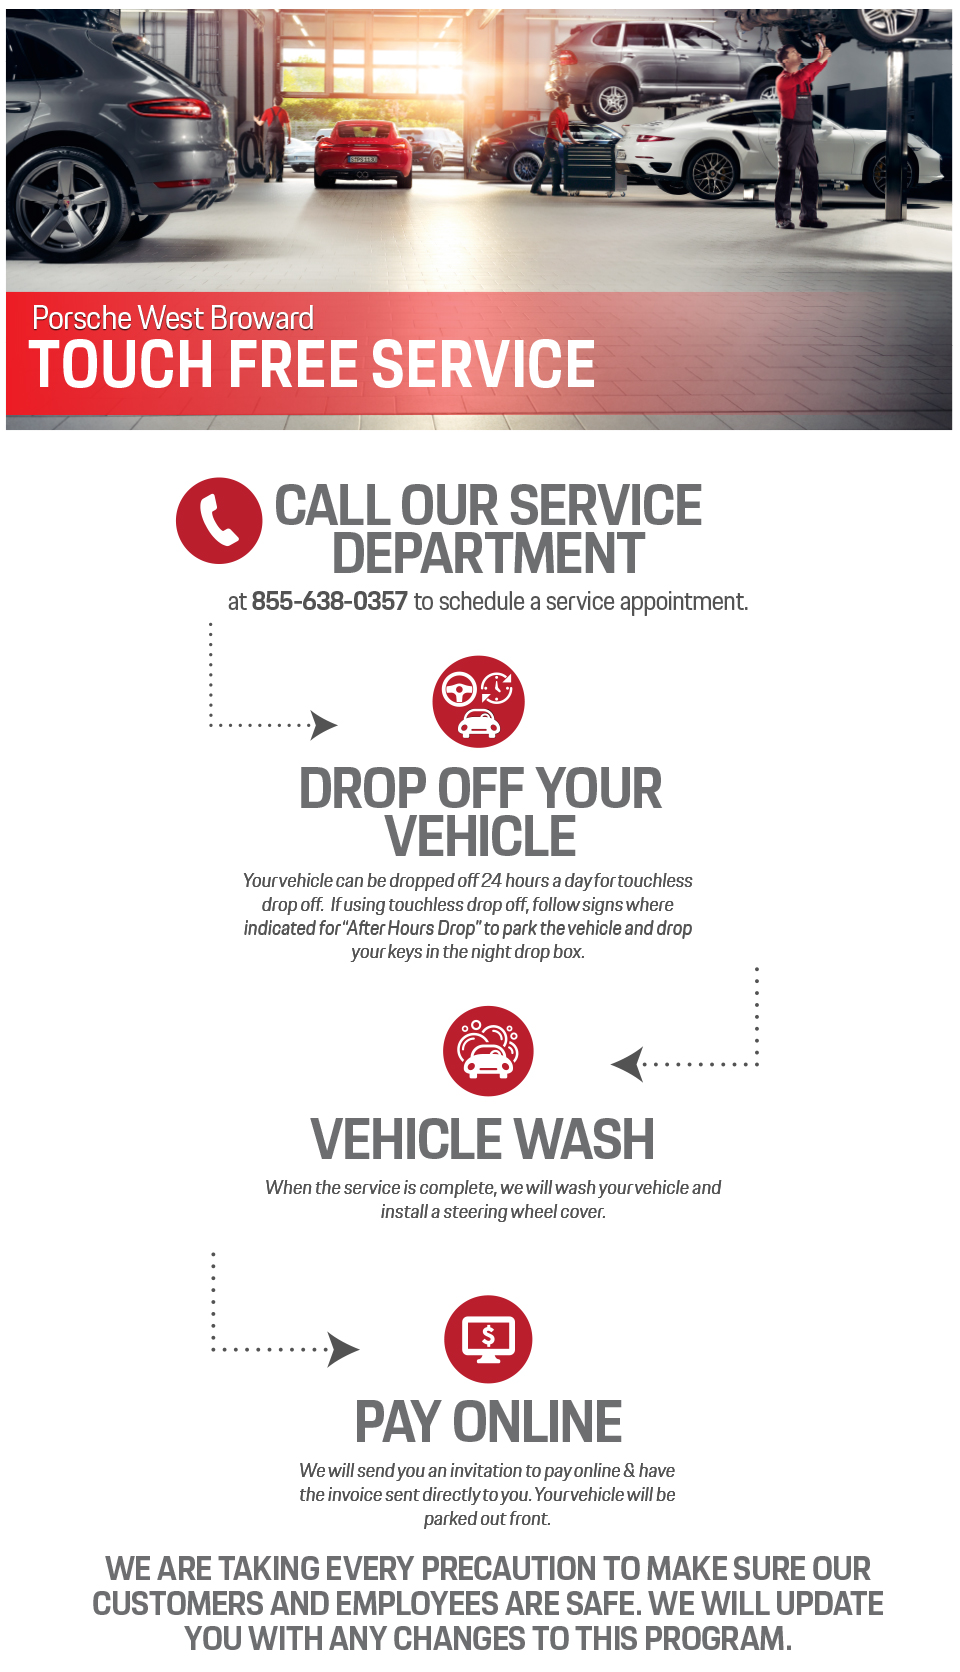 Porsche West Broward
TOUCH FREE SERVICE
CALL OUR SERVICEDEPARTMENT
at 855-638-0357 to schedule a service appointment
DROP OFF YOUR VEHICLE
Your vehicle can be dropped off 24 hours a day for touchless drop off. If using touchless drop off, follow signs where indicated for “After Hours Drop” to park the vehicle and drop your keys in the night drop box.
VEHICLE WASH
When the service is complete, we will wash your vehicle and install a steering wheel cover..
PAY ONLINE
We will send you an invitation to pay online & have the invoice sent directly to you. Your vehicle will be parked out front. We are taking every precaution to make sure our customers and employees are safe. We will update you with any changes to this program.